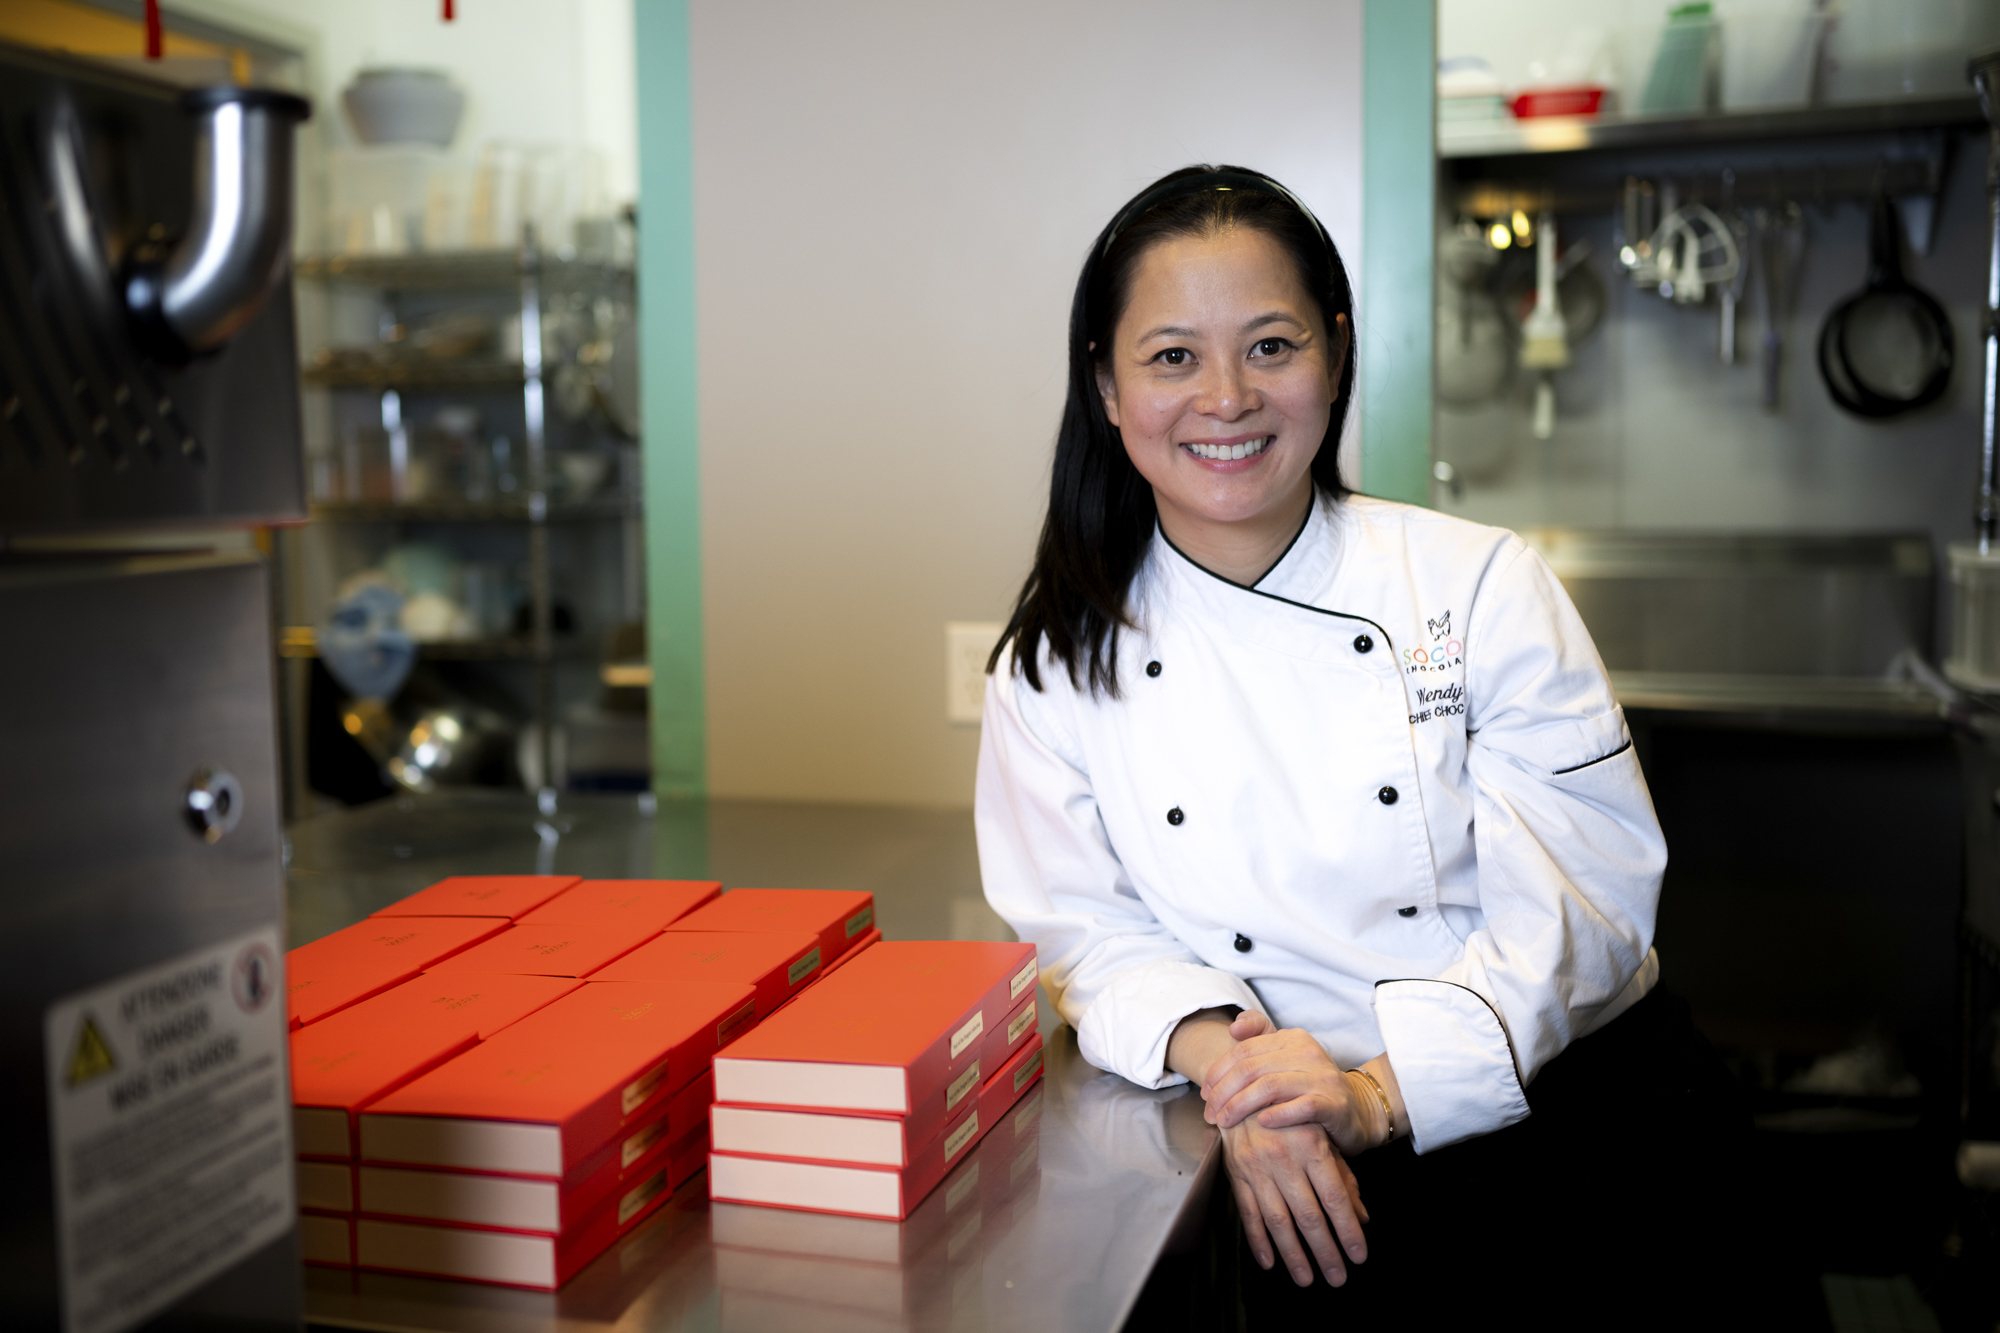 Asian woman in chef's whites leans on a table next to a stack of red boxes.